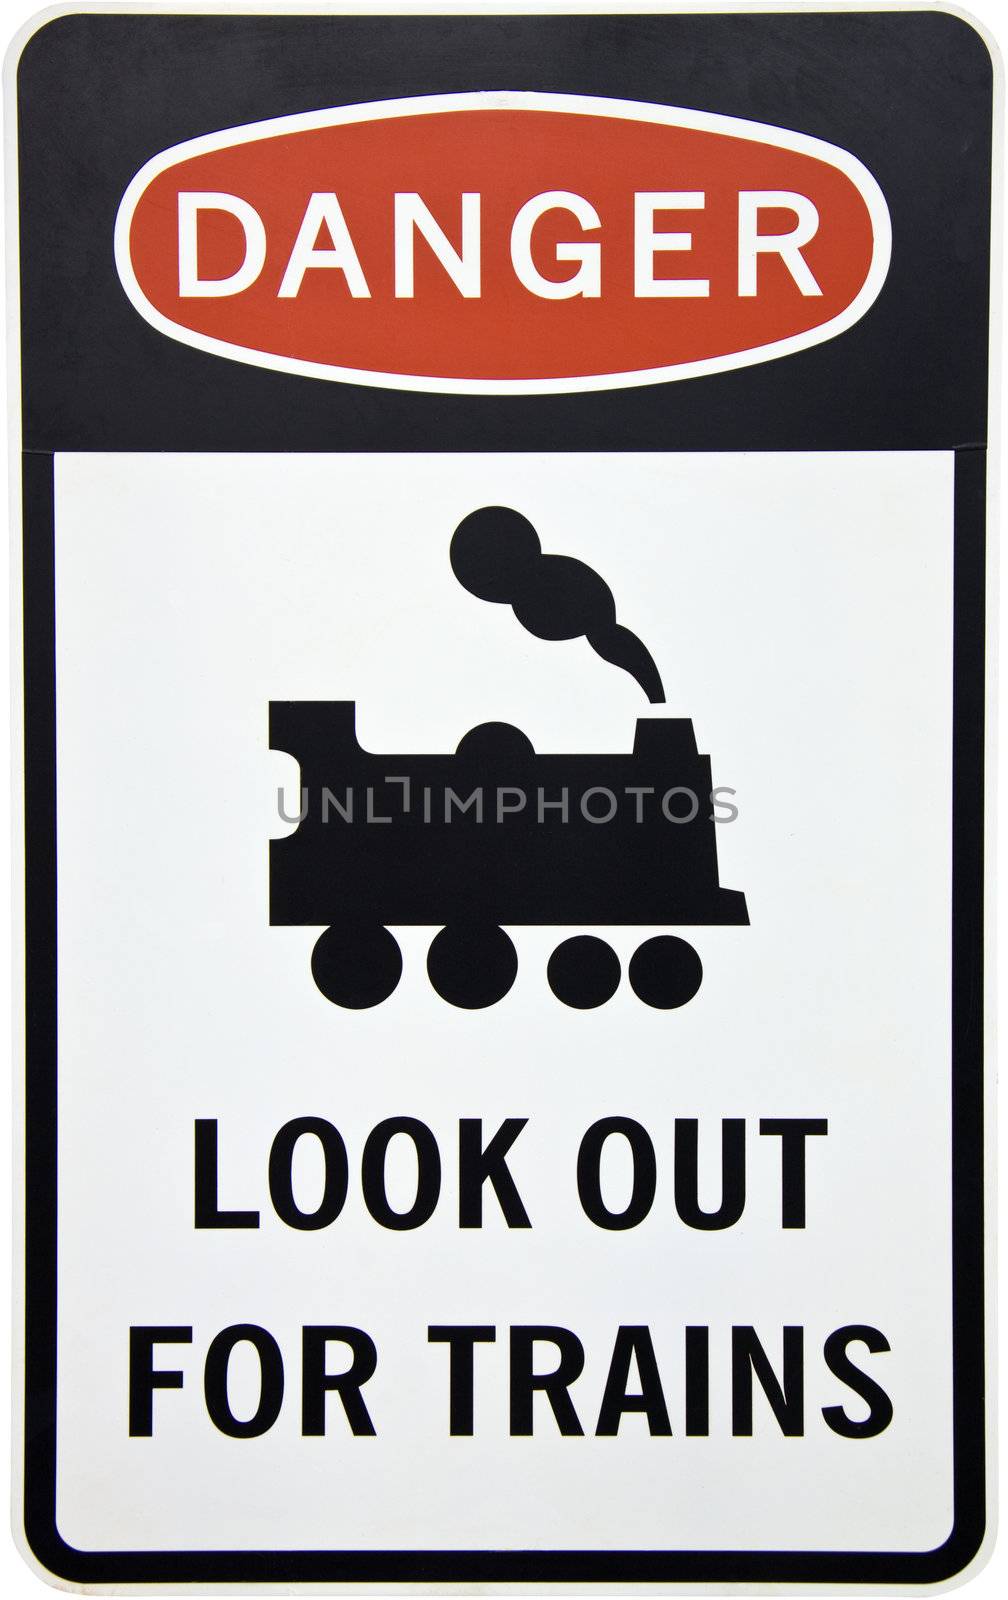 Warning for trains sign by Jaykayl